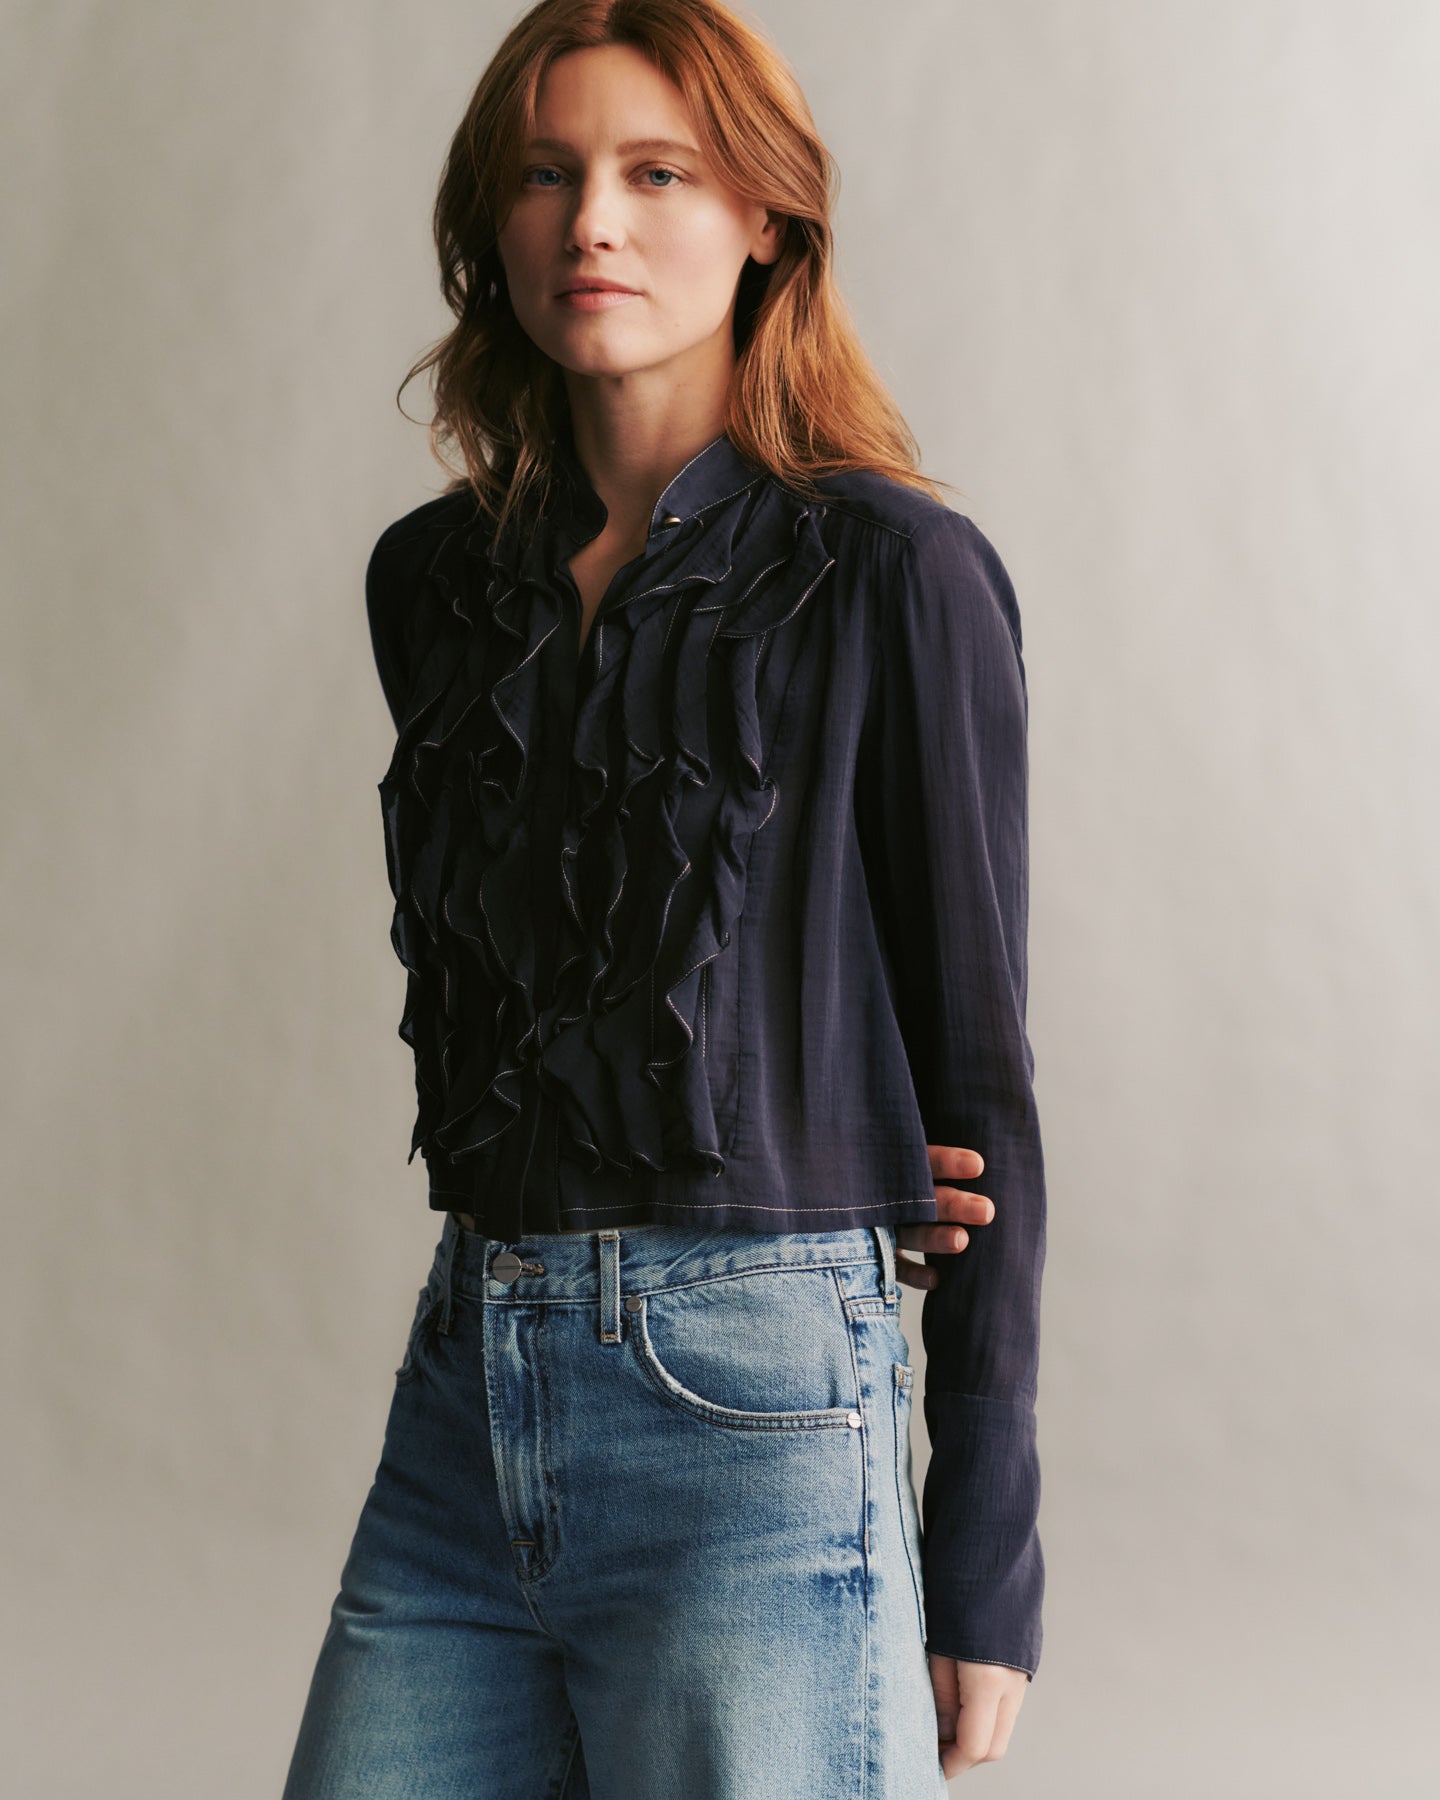 TWP Midnight Patti shirt in crinkled silk cotton voile view 1